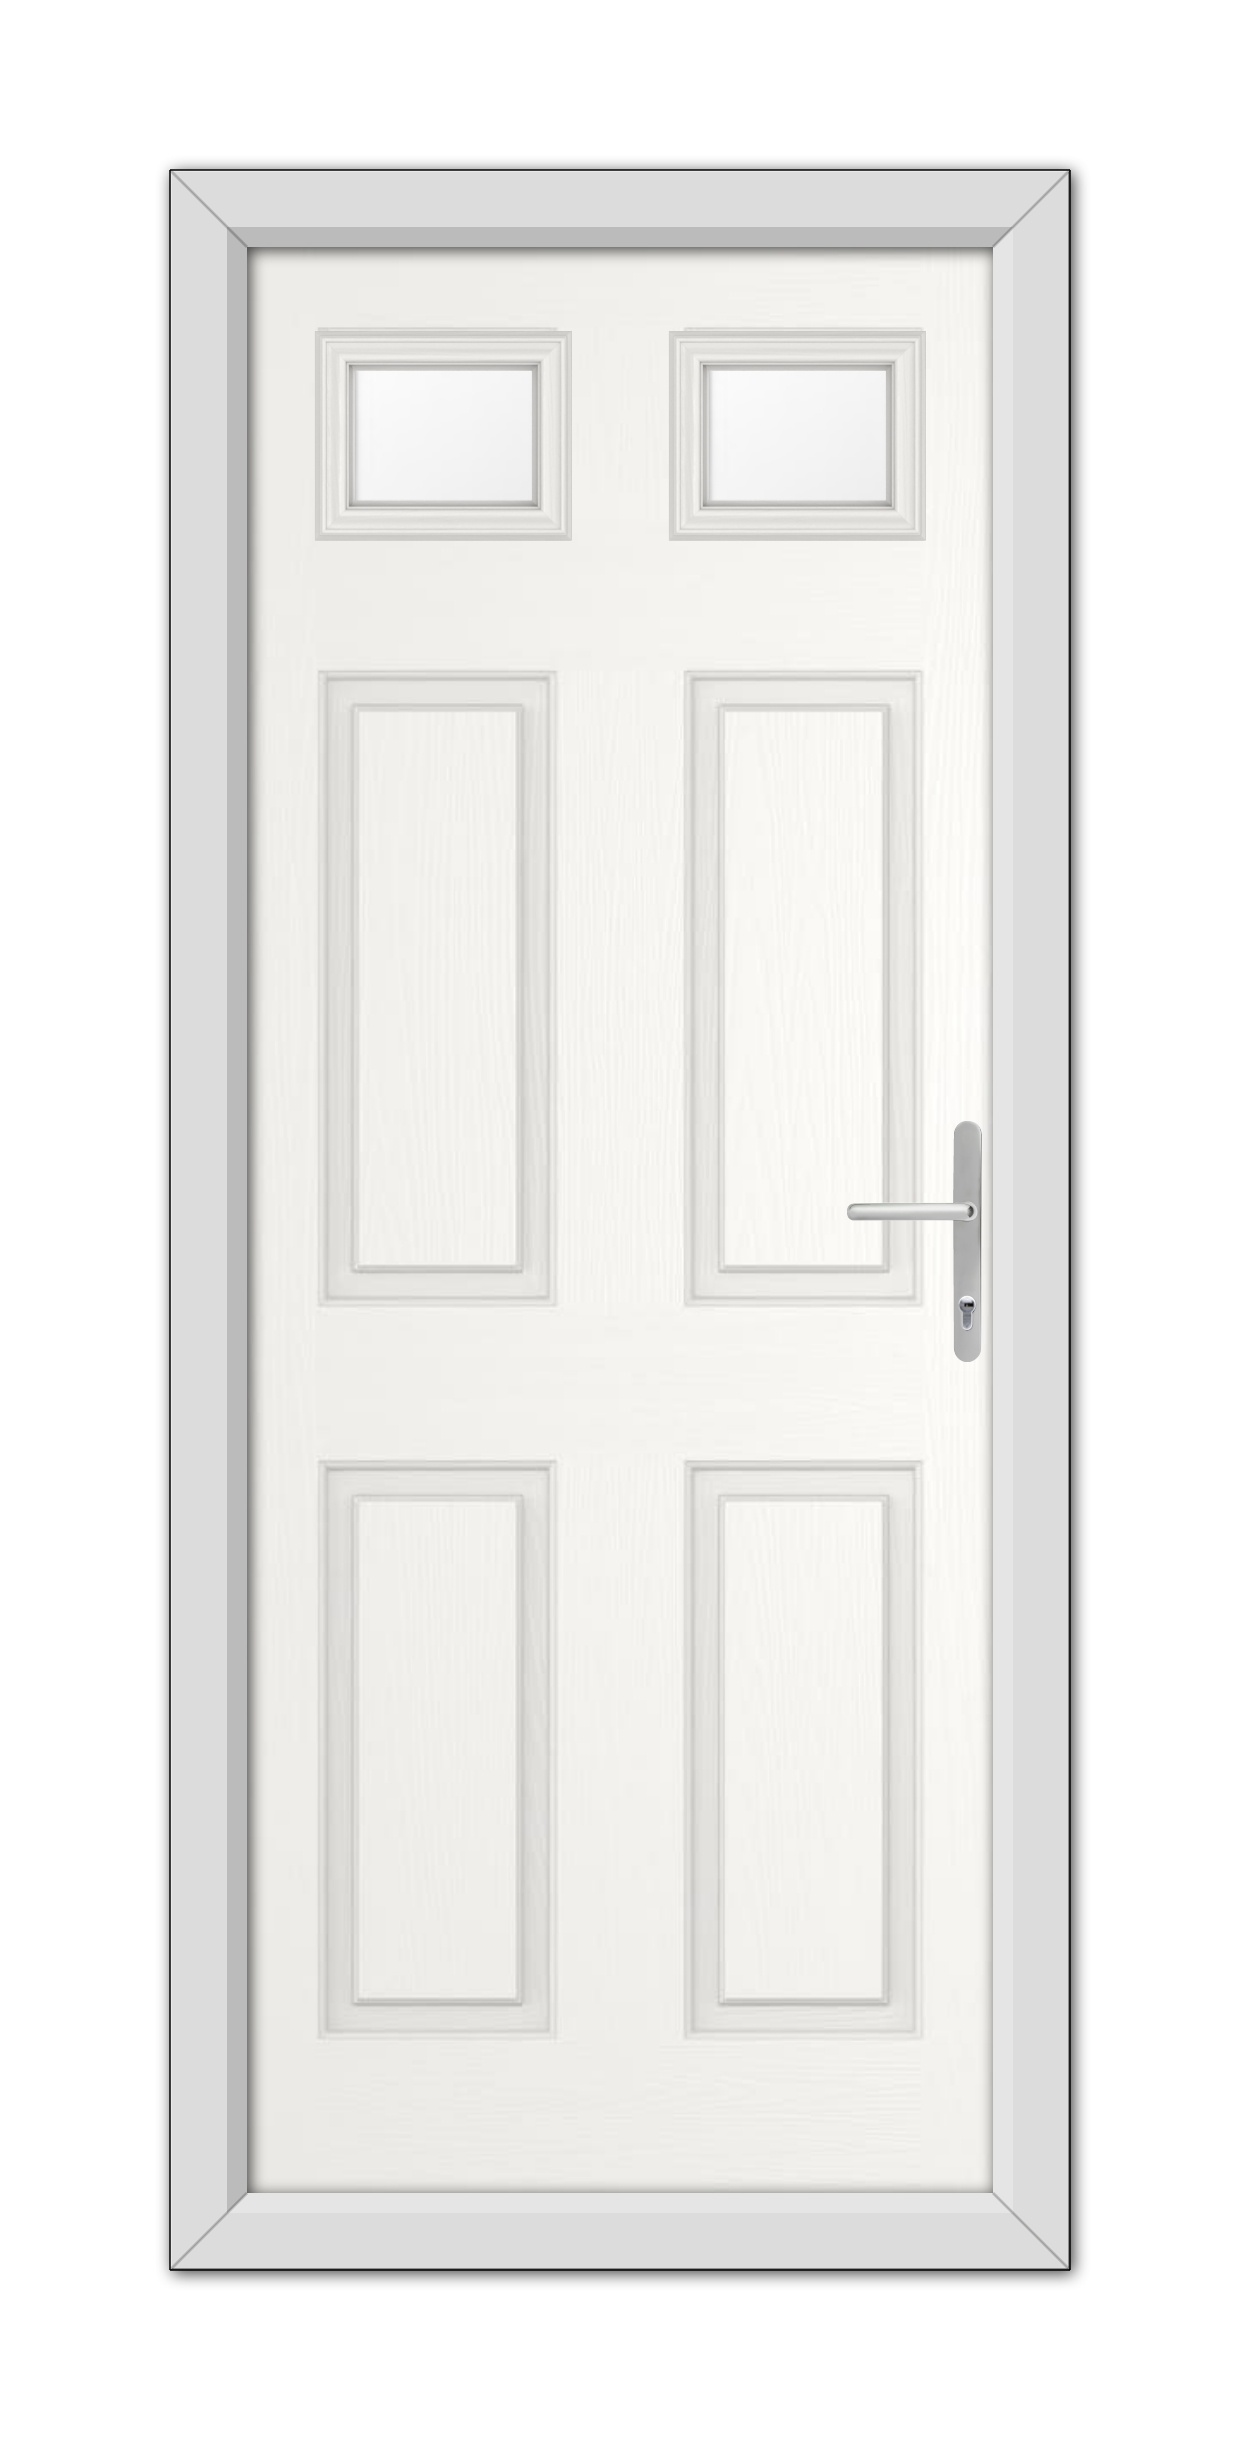 A White Middleton Glazed 2 Composite Door 48mm Timber Core with a metal handle, set in a simple frame, viewed frontally.